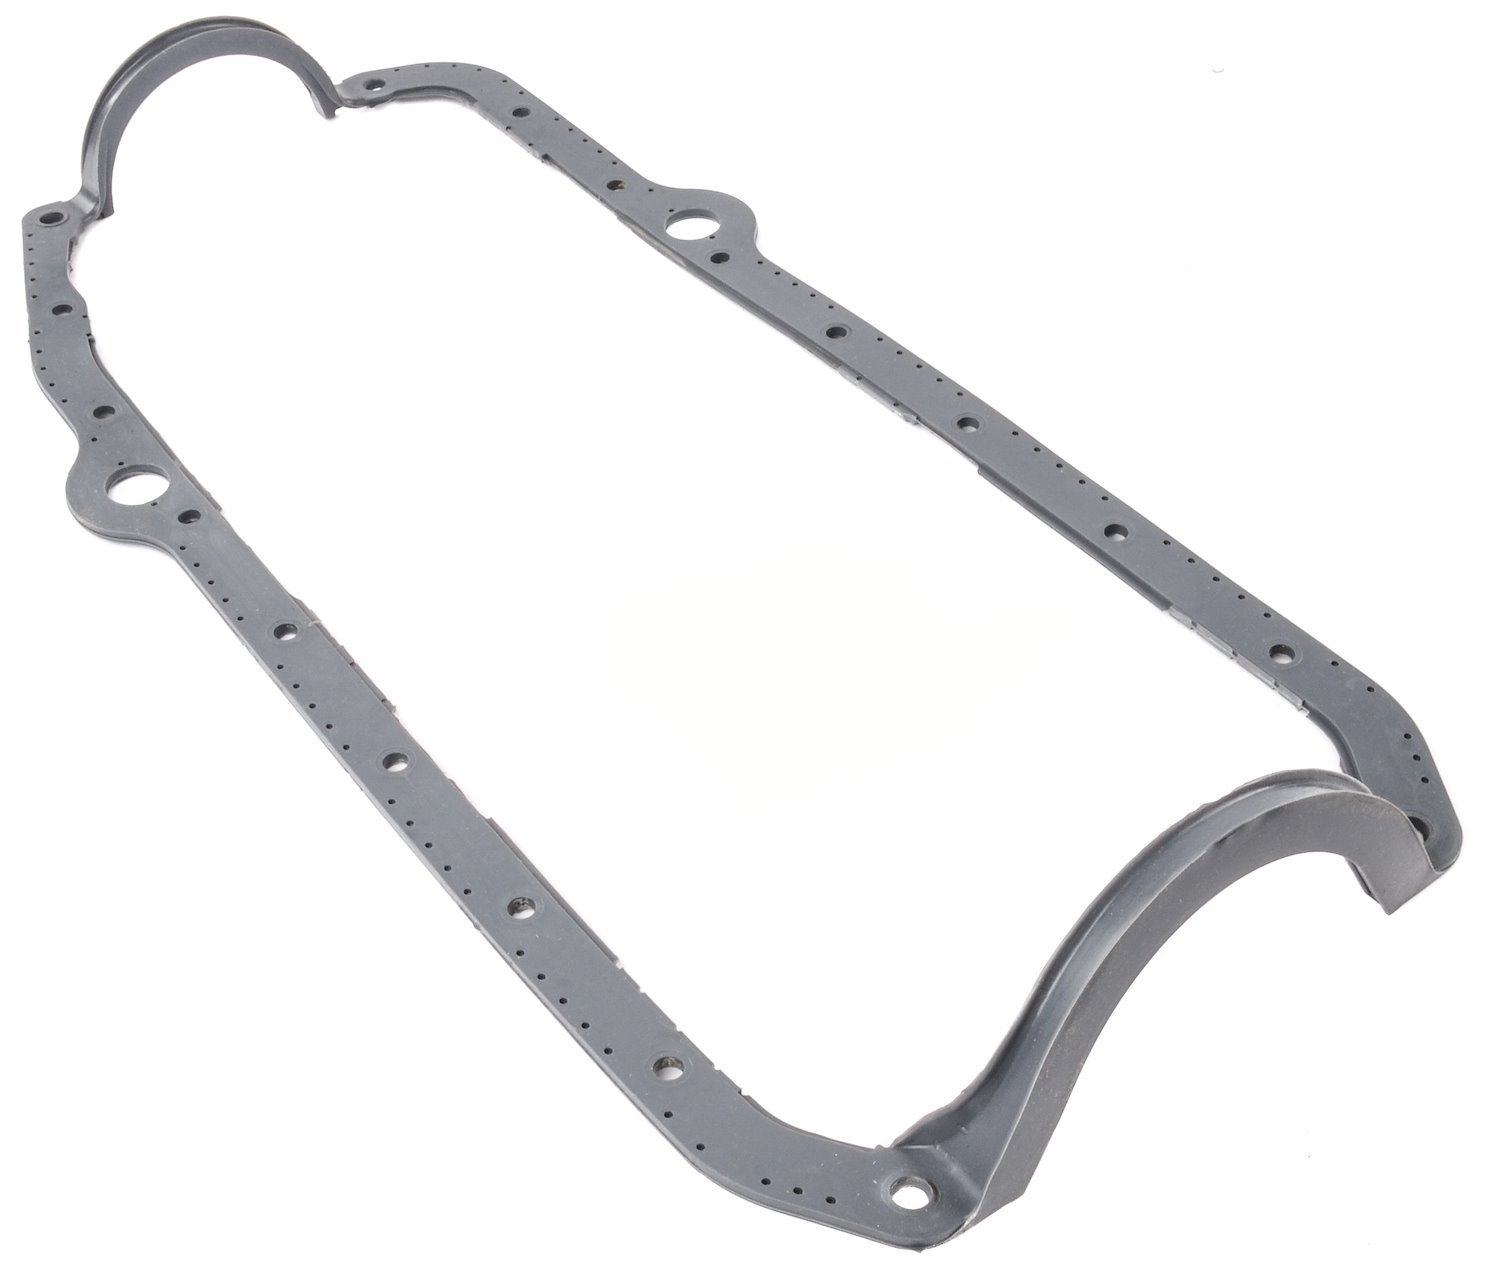 One-Piece Oil Pan Gasket for 1975-1985 Small Block